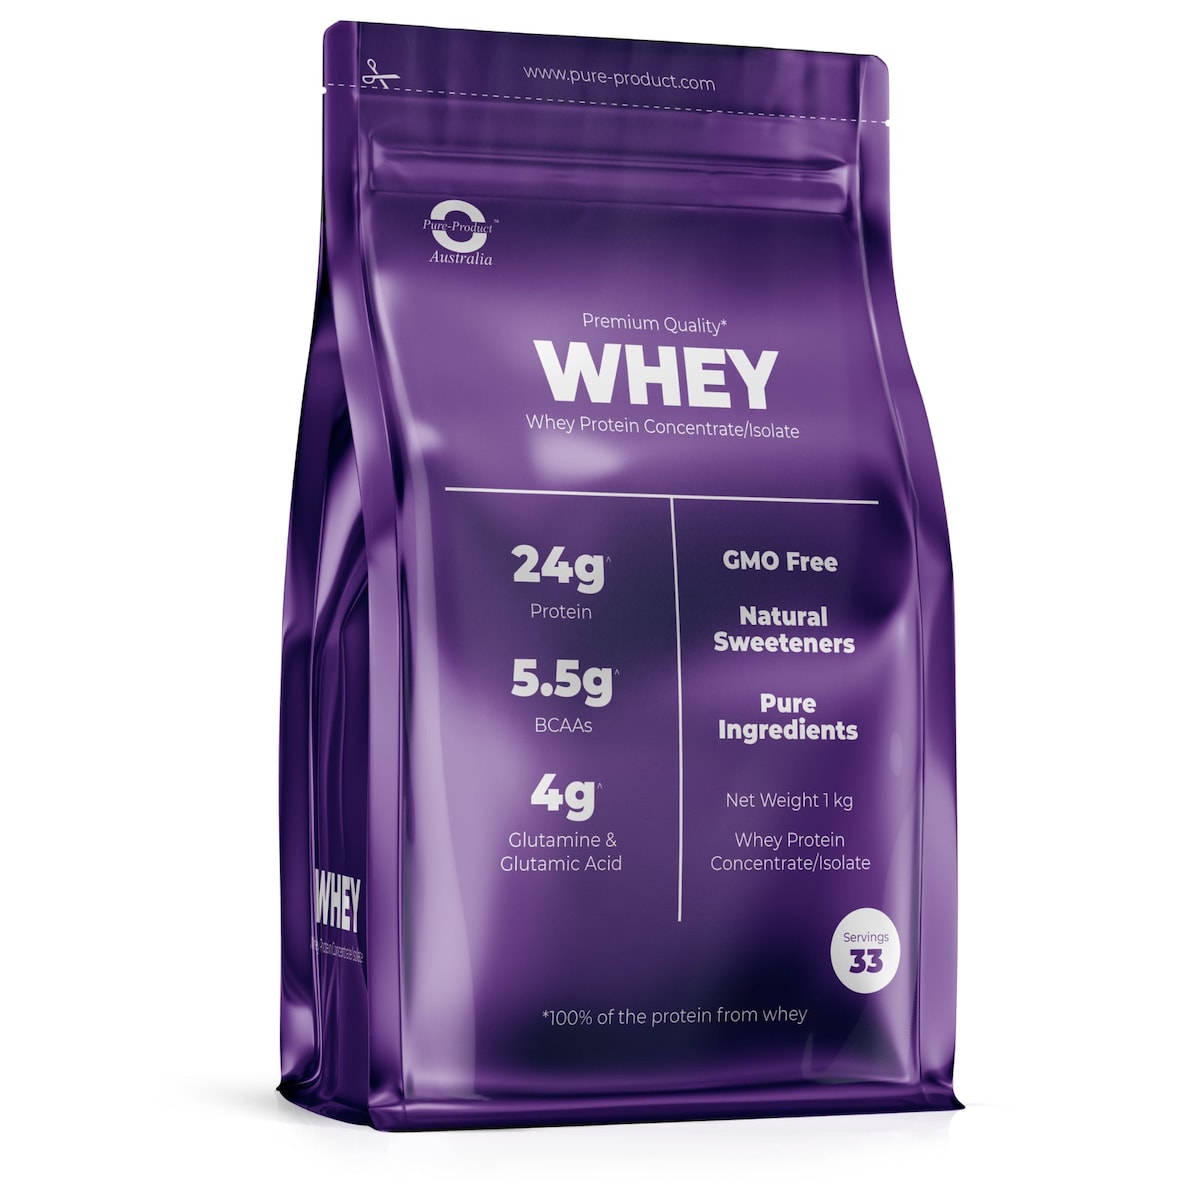 Pure Product Australia Whey Protein Concentrate/Isolate Chocolate 1Kg